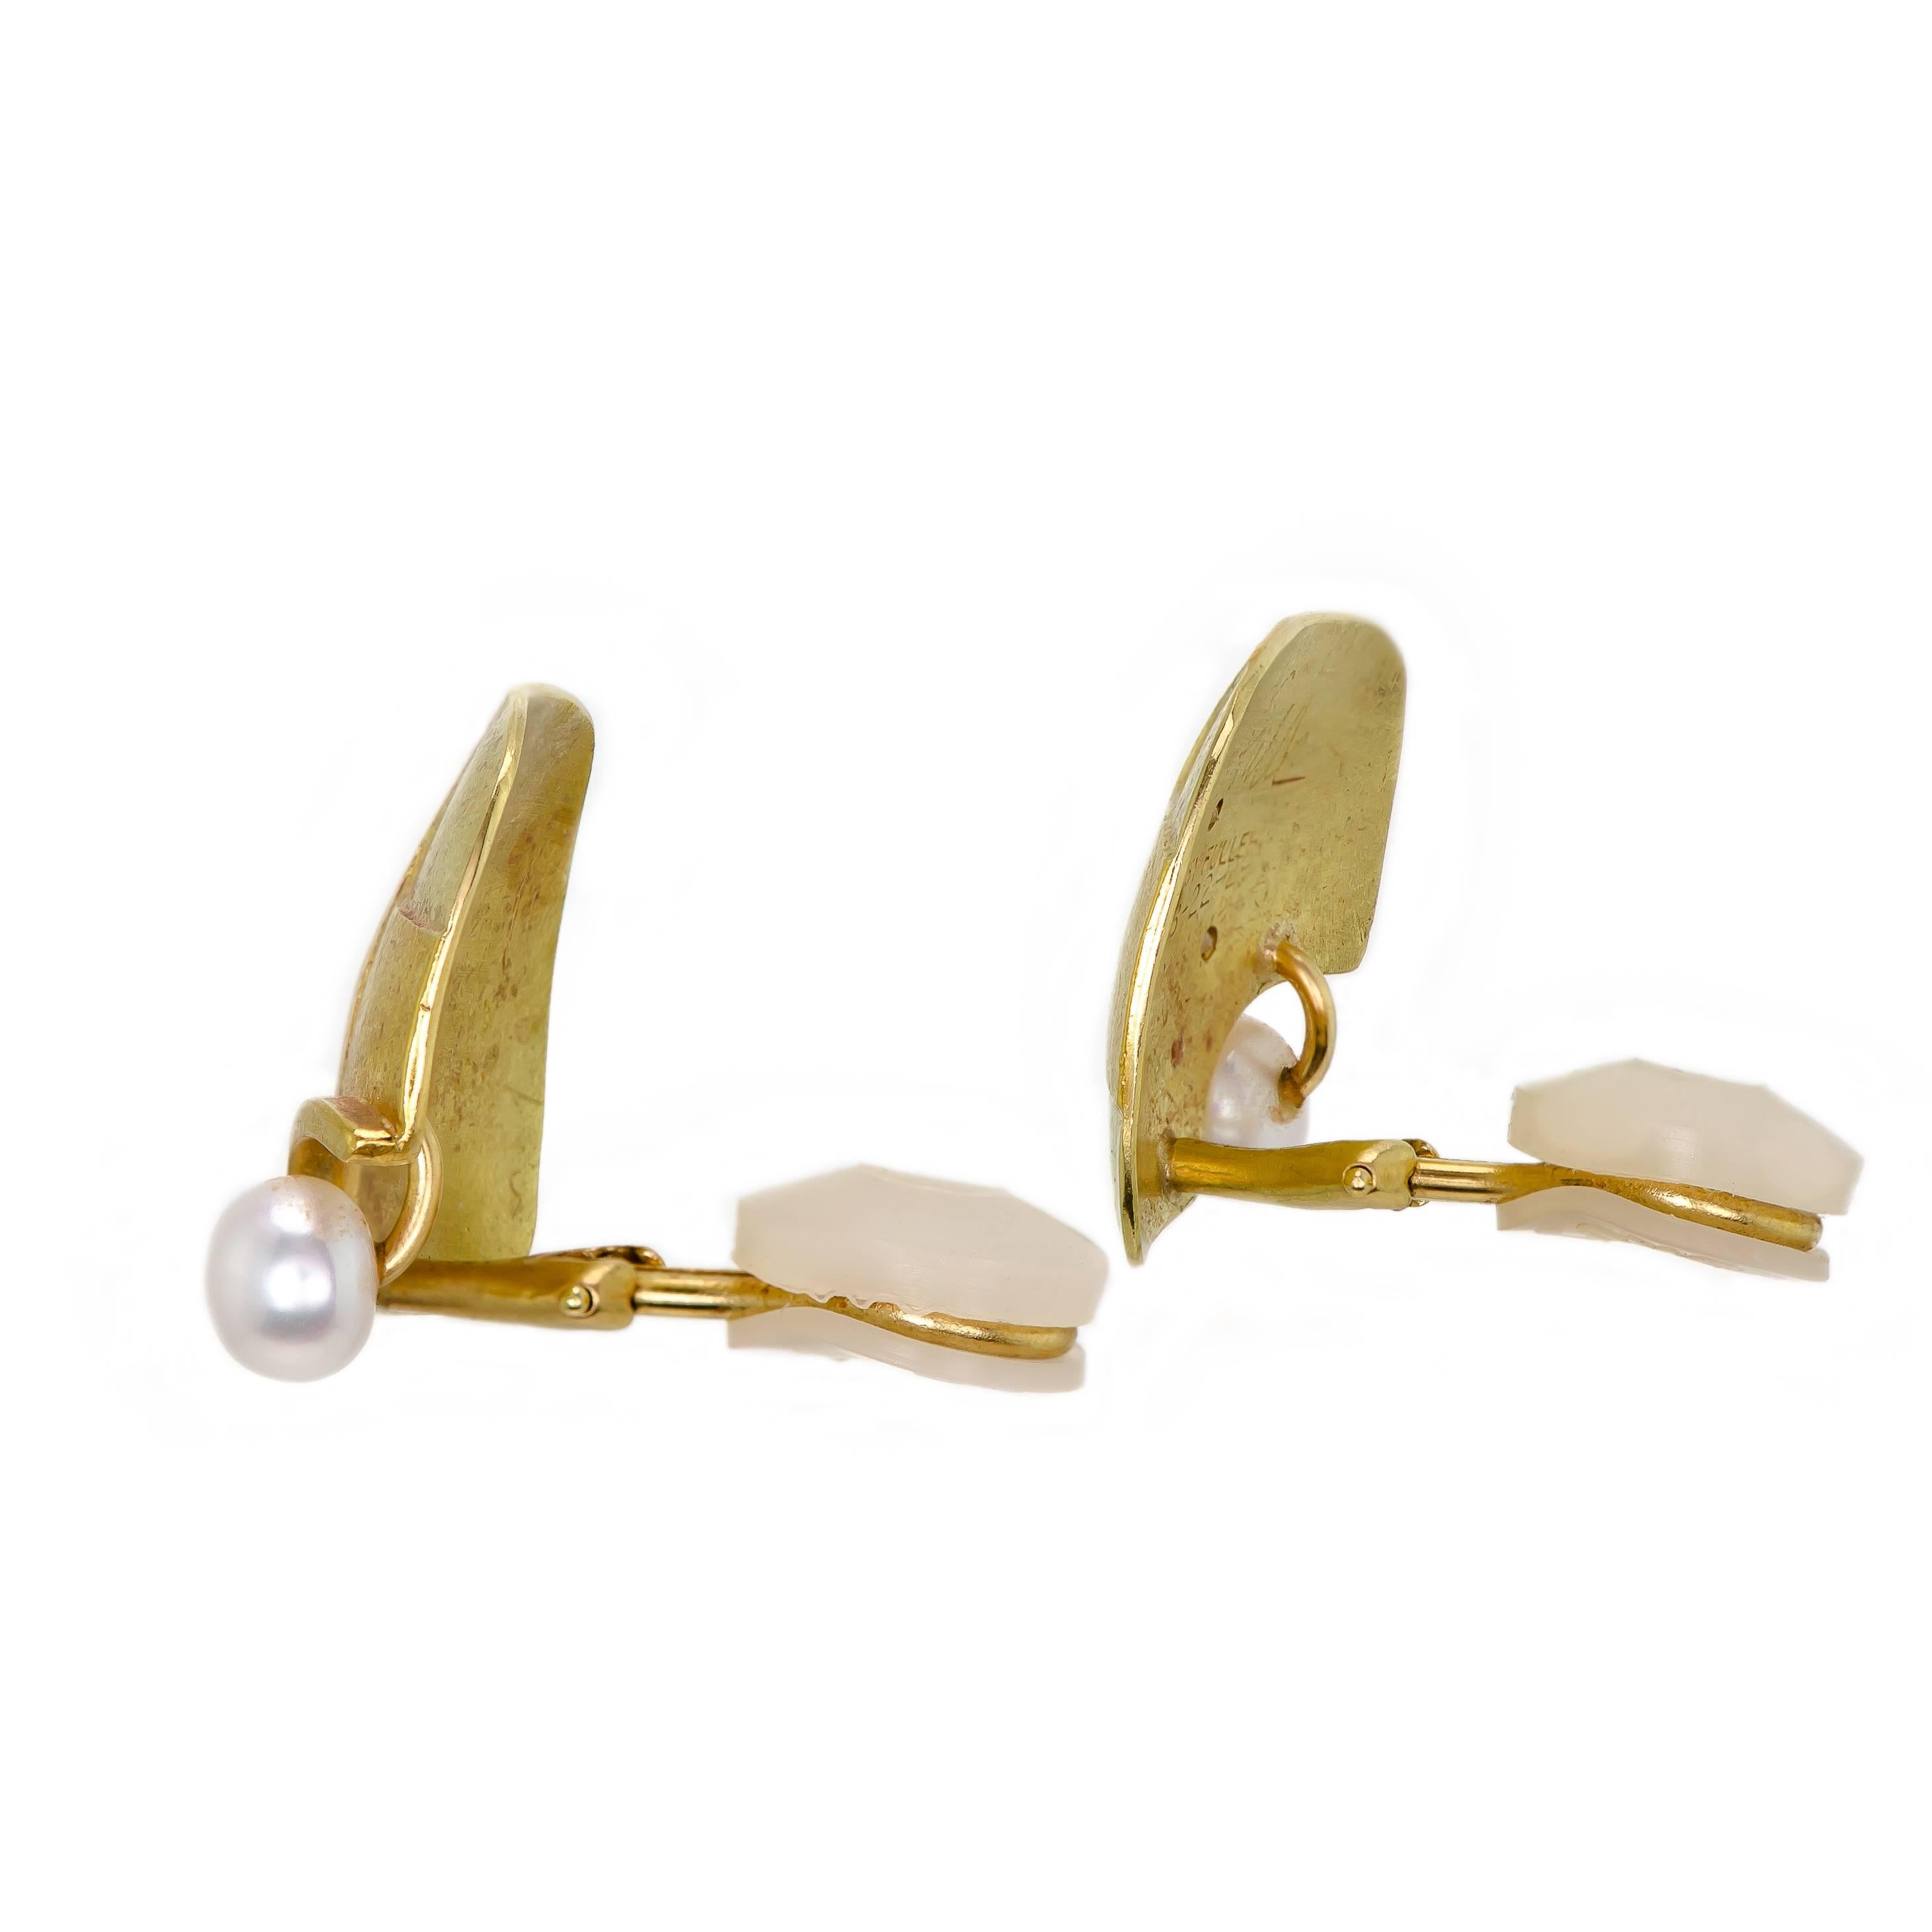 Exquisite 1980's Betsy Fuller asymmetrical 22k-24k yellow gold diamond and pearl ear clips 
measuring about ¾